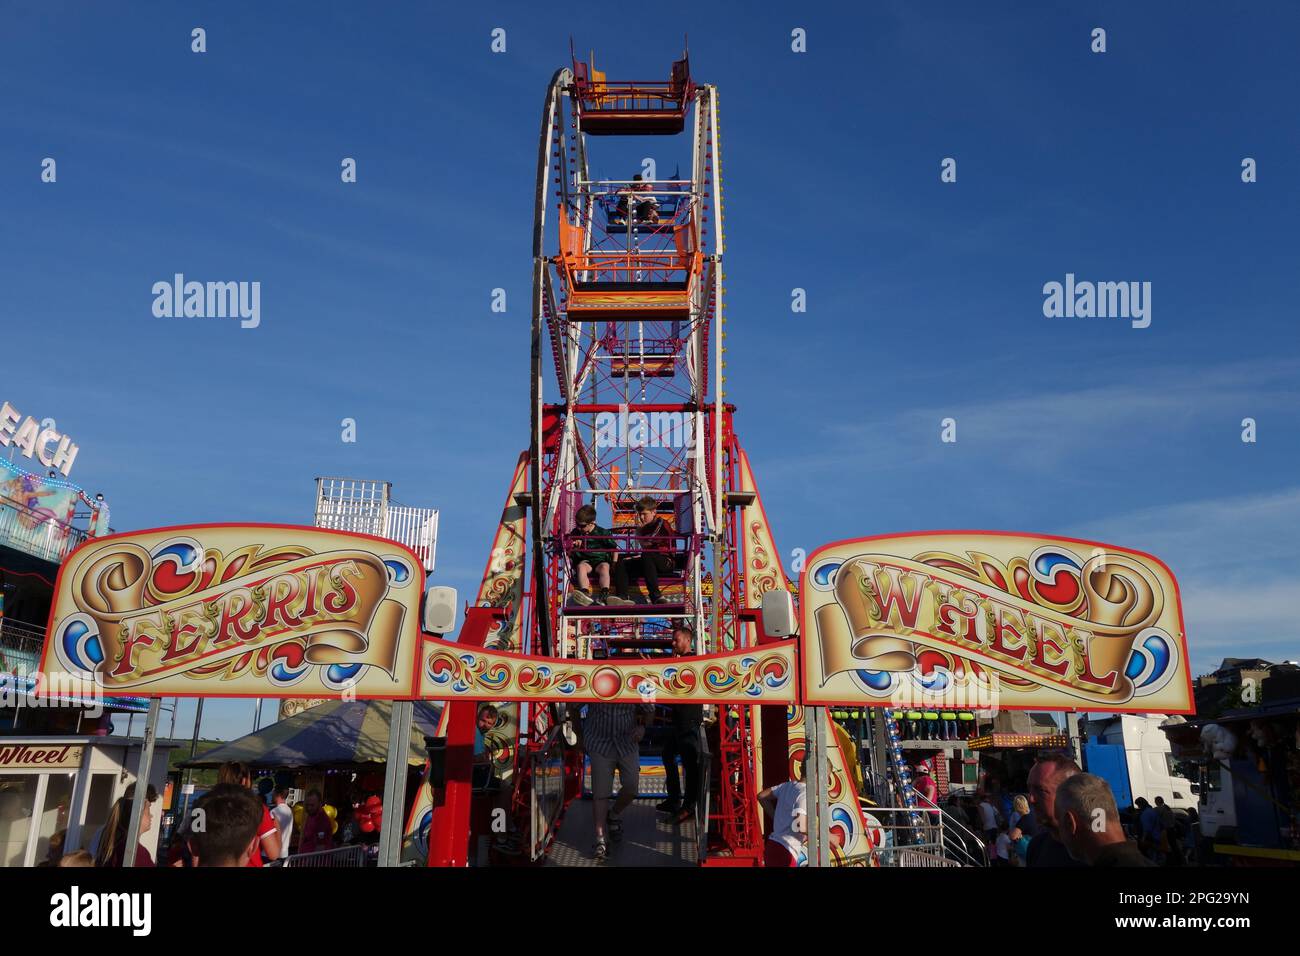 Youghal fairground attraction, County Cork, Ireland Stock Photo